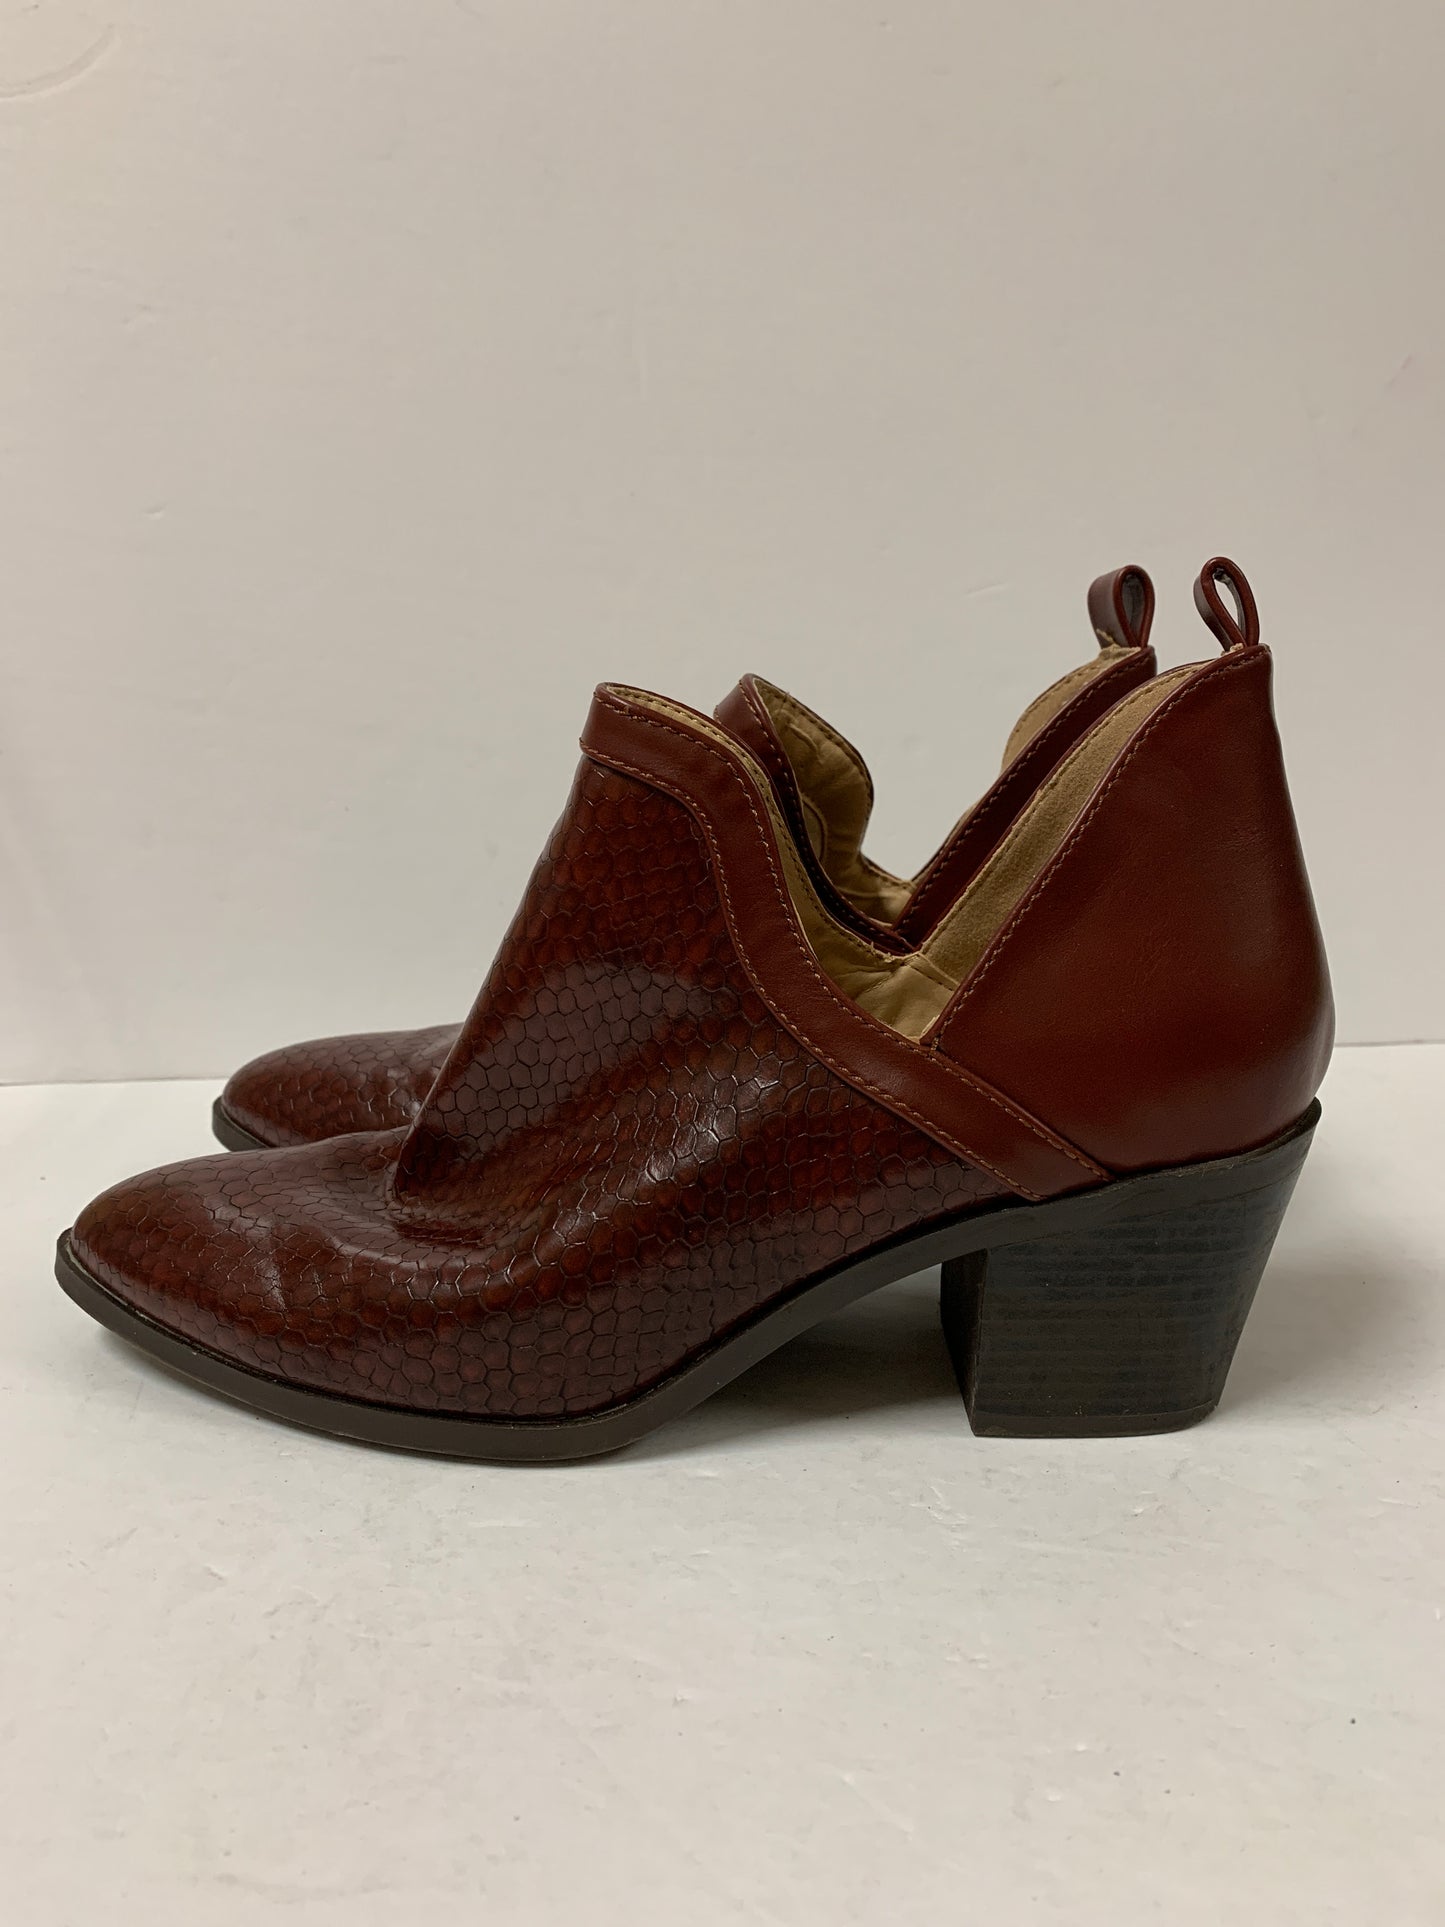 Boots Ankle Heels By Clothes Mentor  Size: 7.5